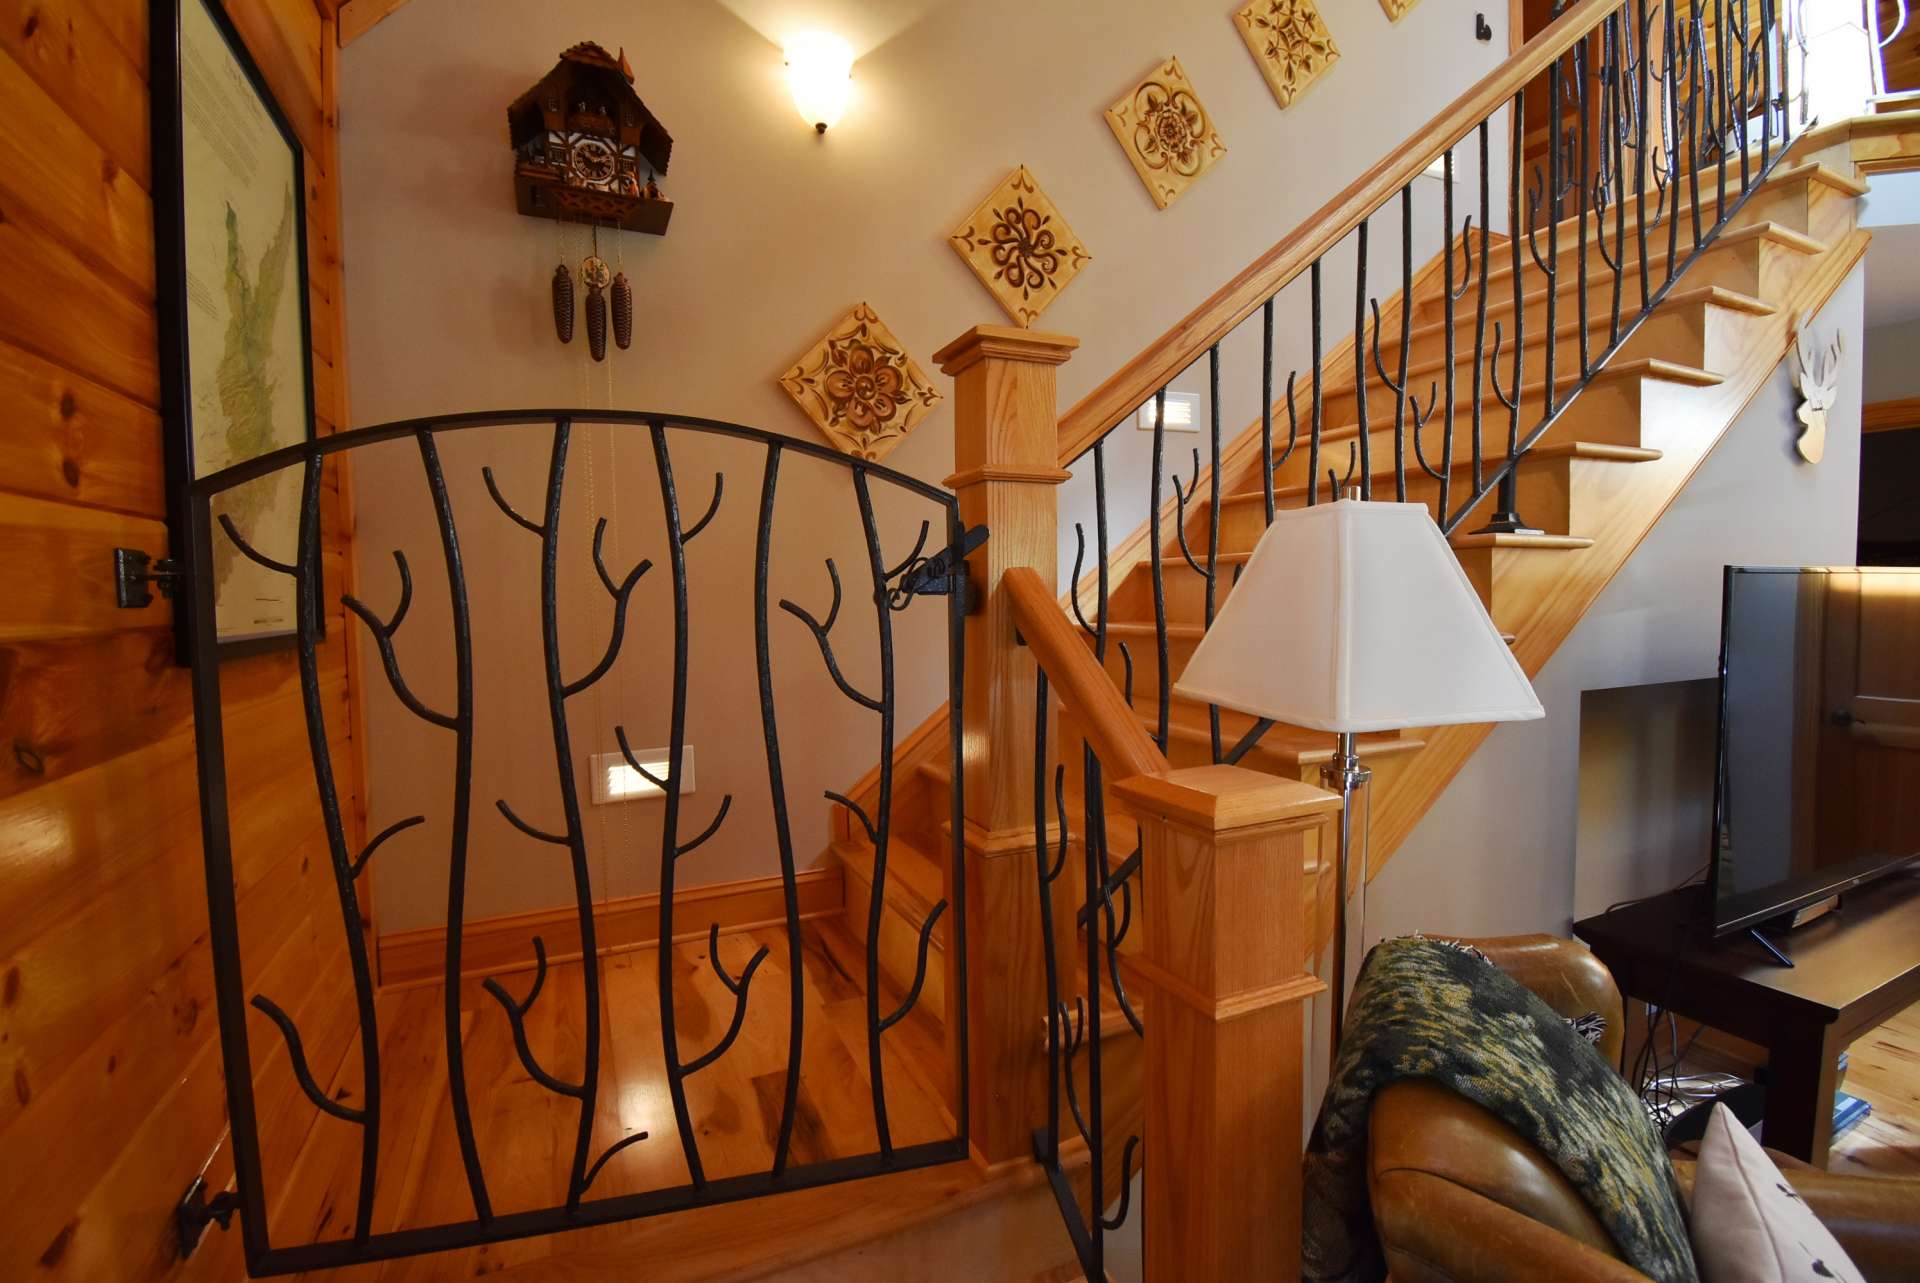 You'll love the custom railing with child/pet gates at the top and bottom of the stairs leading to the upper level.